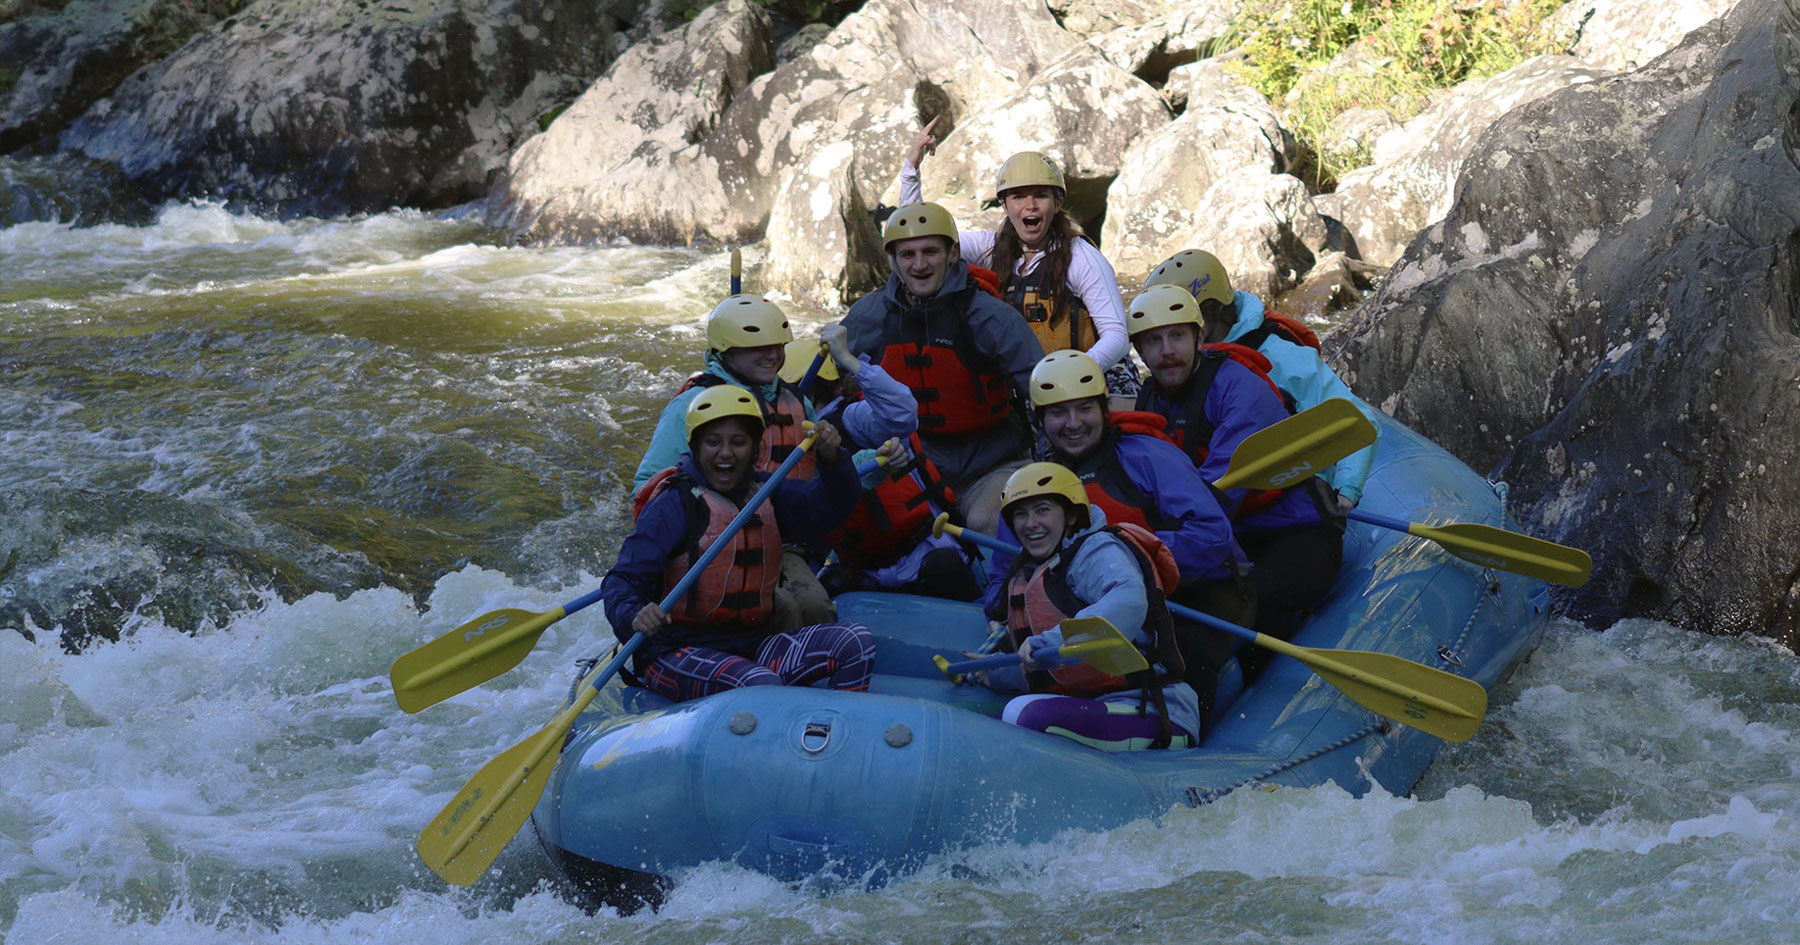 Outdoors club students participate in a white water rafting trip